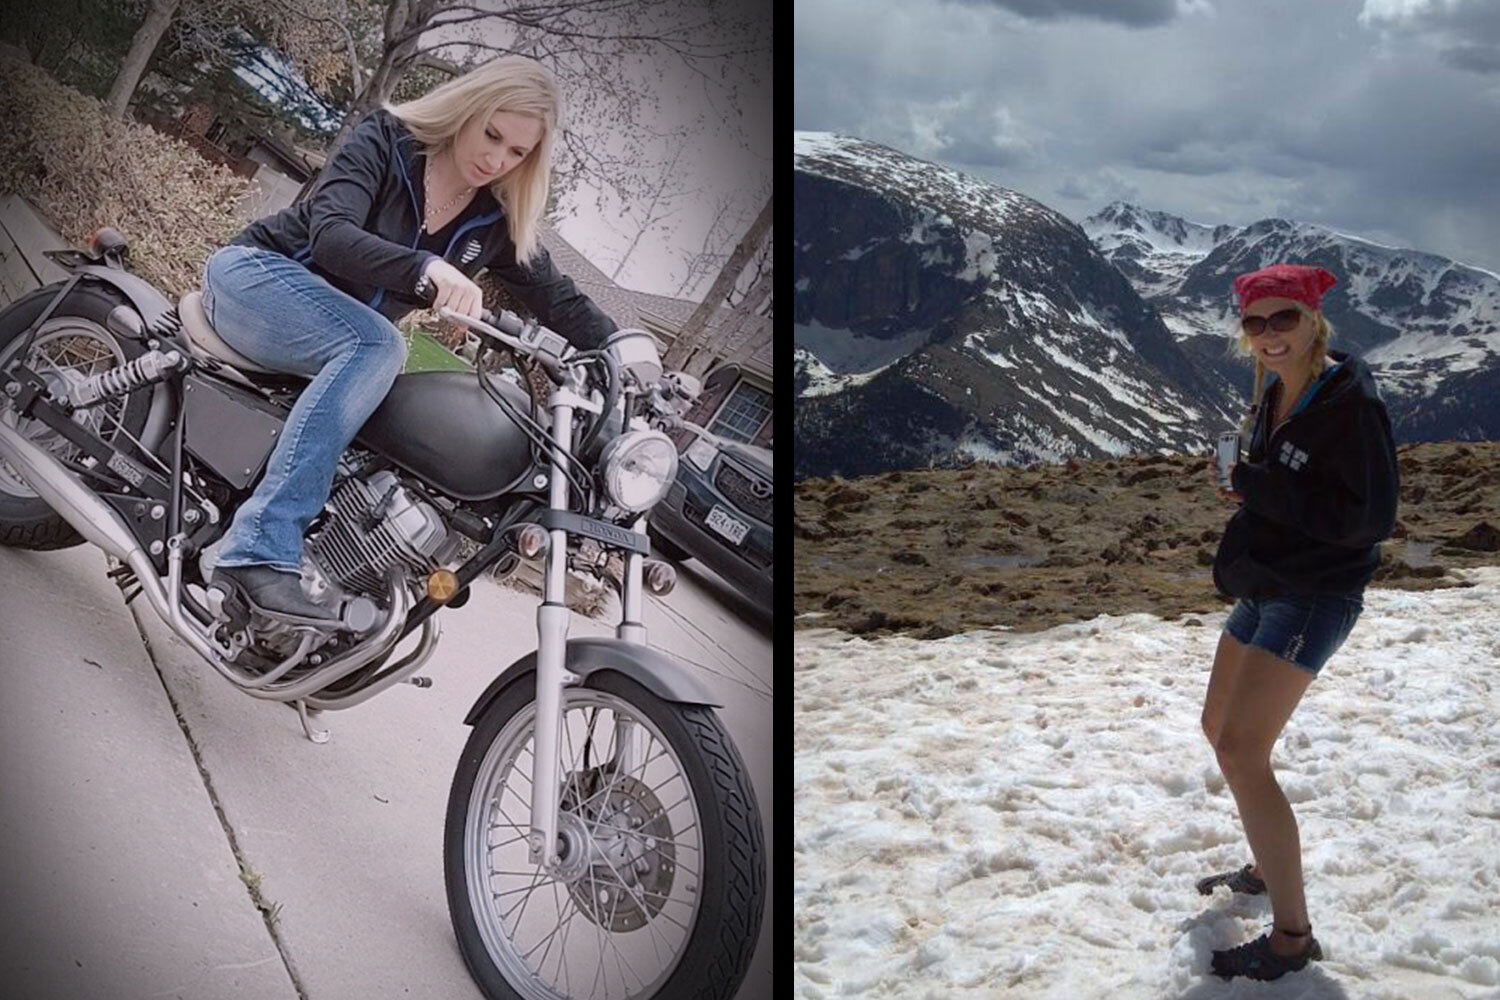 I like motorcycles and long walks on a snowy mountain